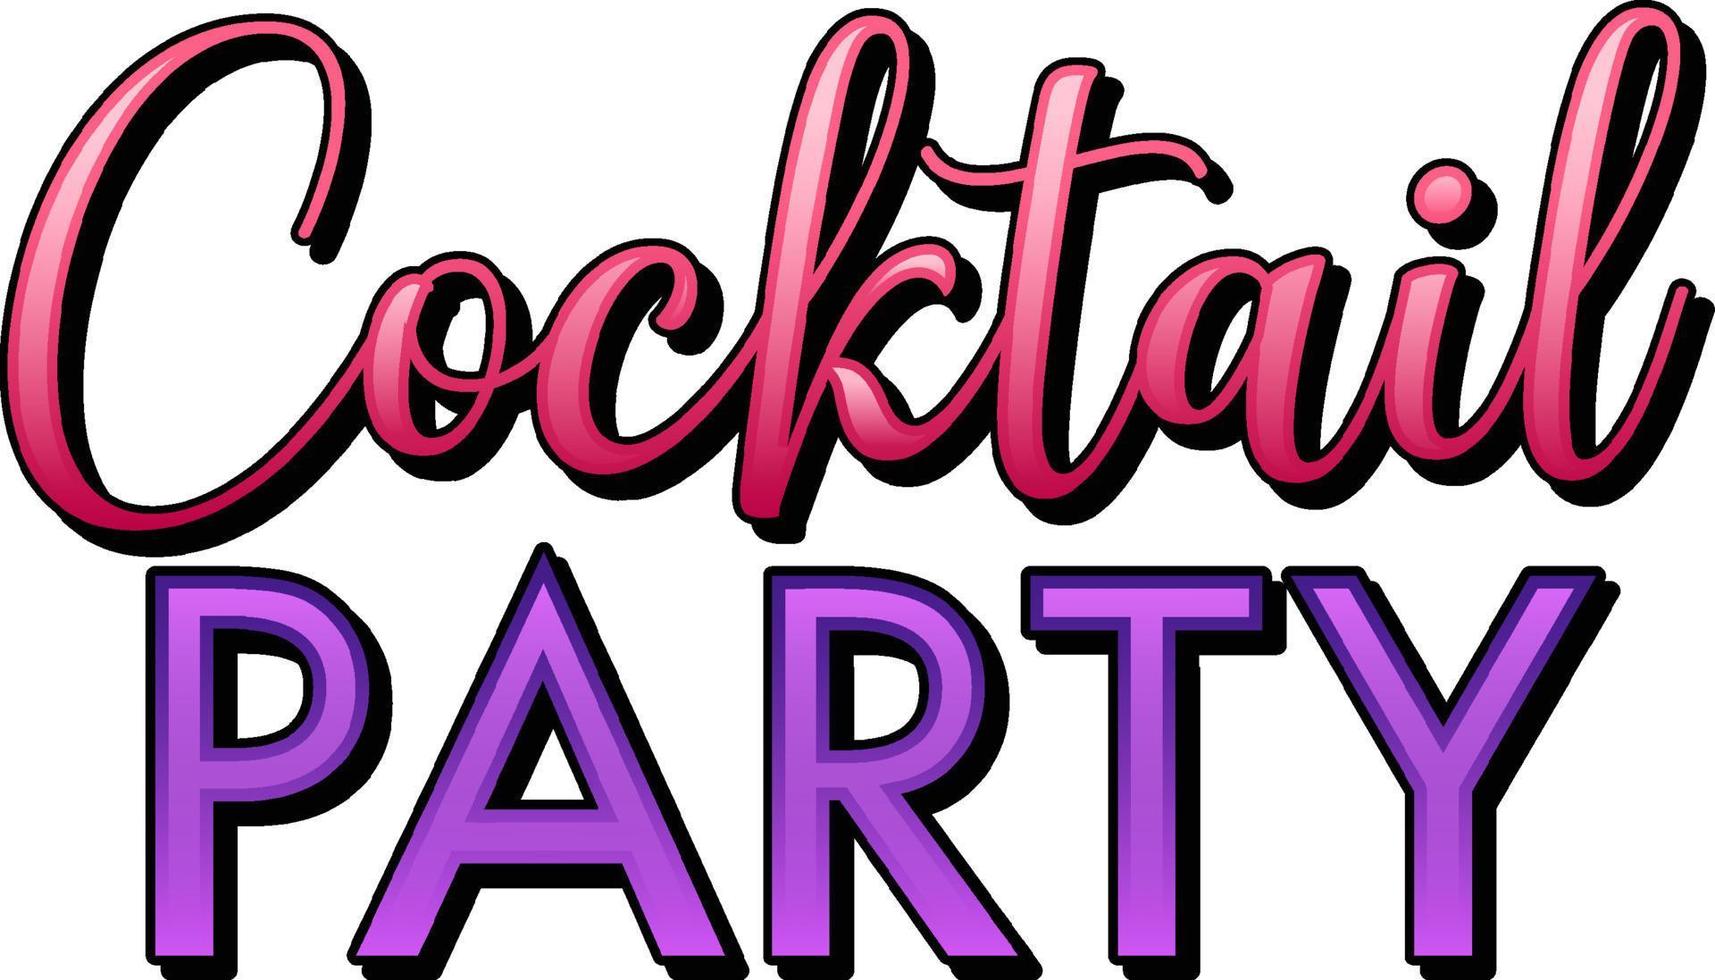 Cocktails Night Party Isolated Word Text vector